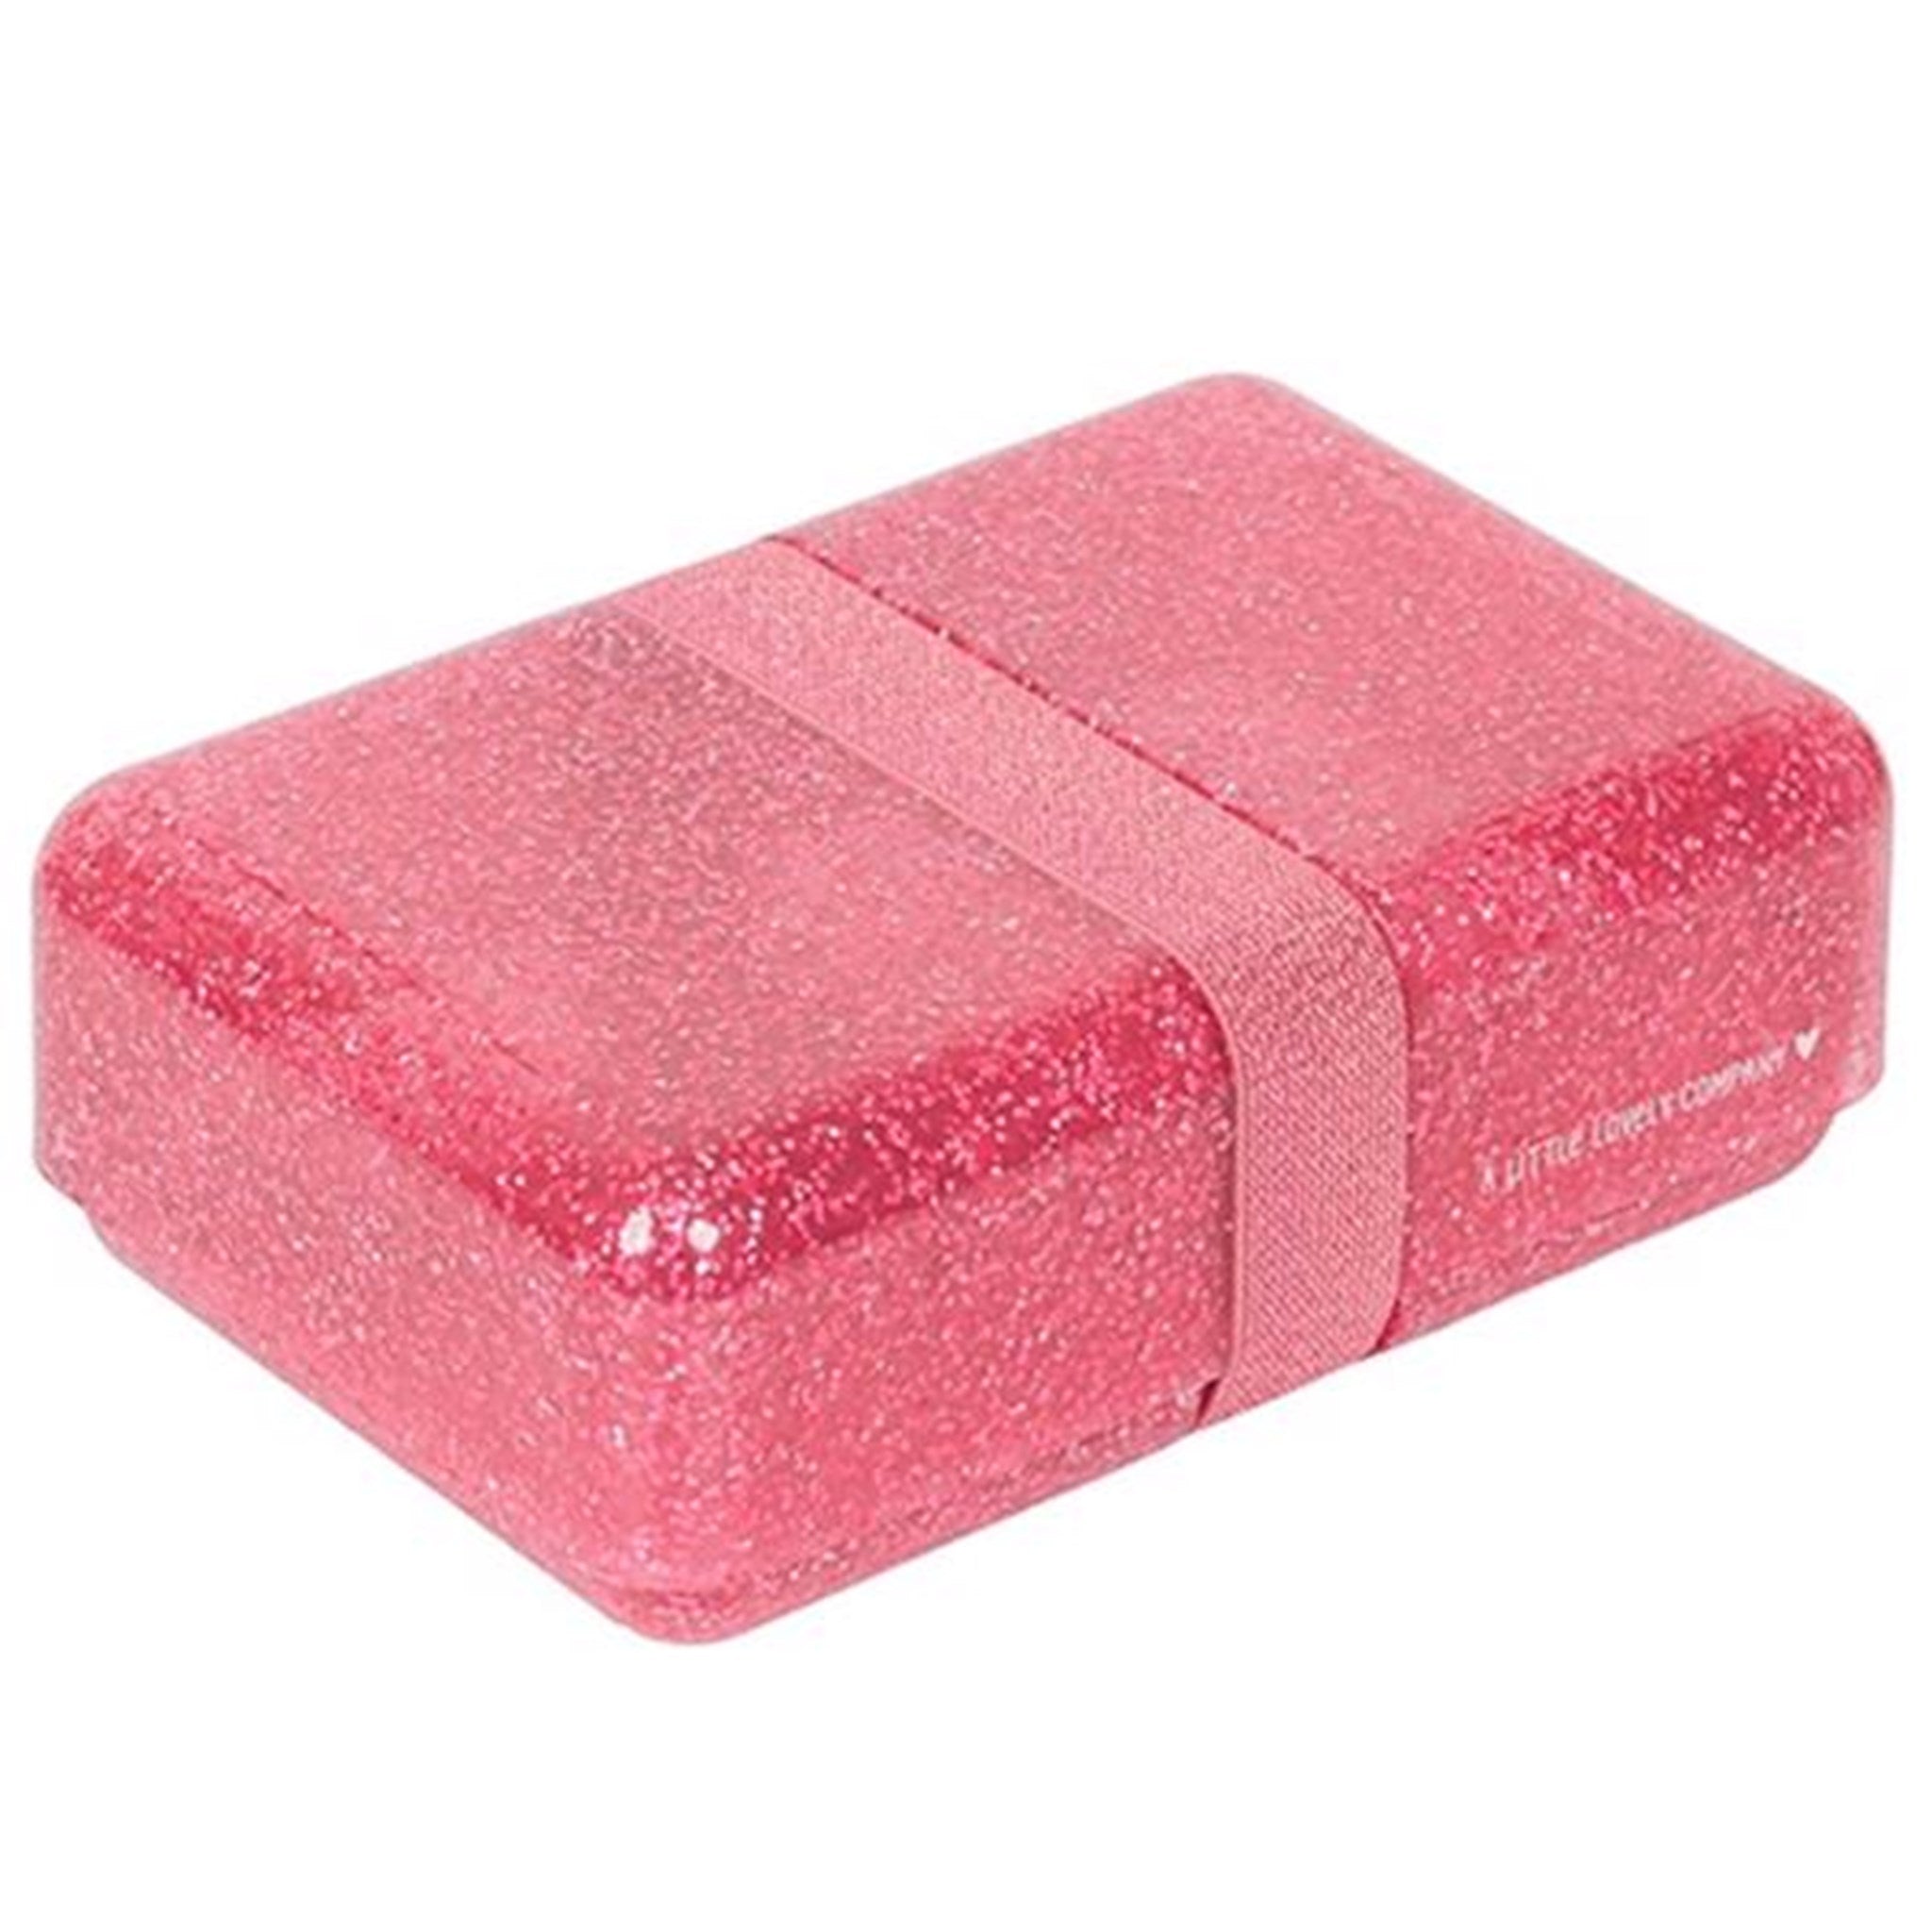 A Little Lovely Company Lunch Box Glitter Pink